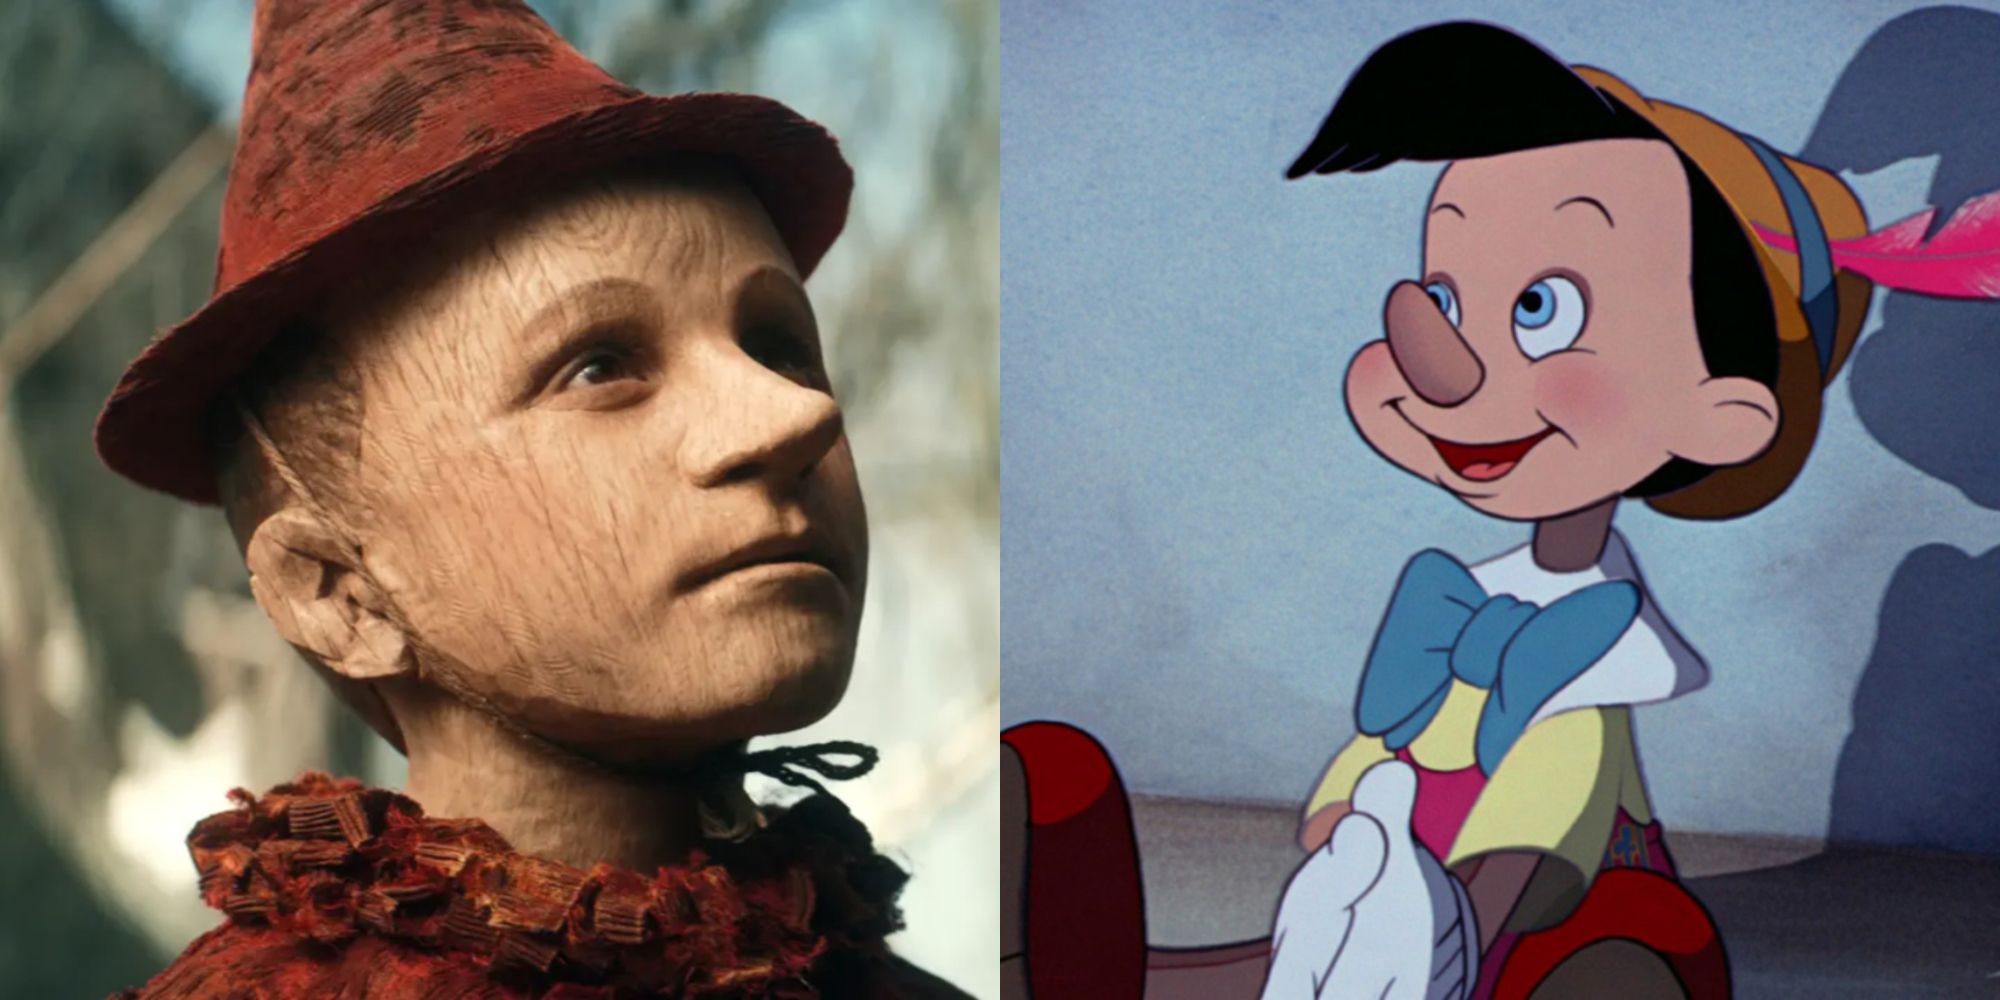 Pinocchio: Top 10 Best Movie And TV Adaptations, Ranked by IMDb